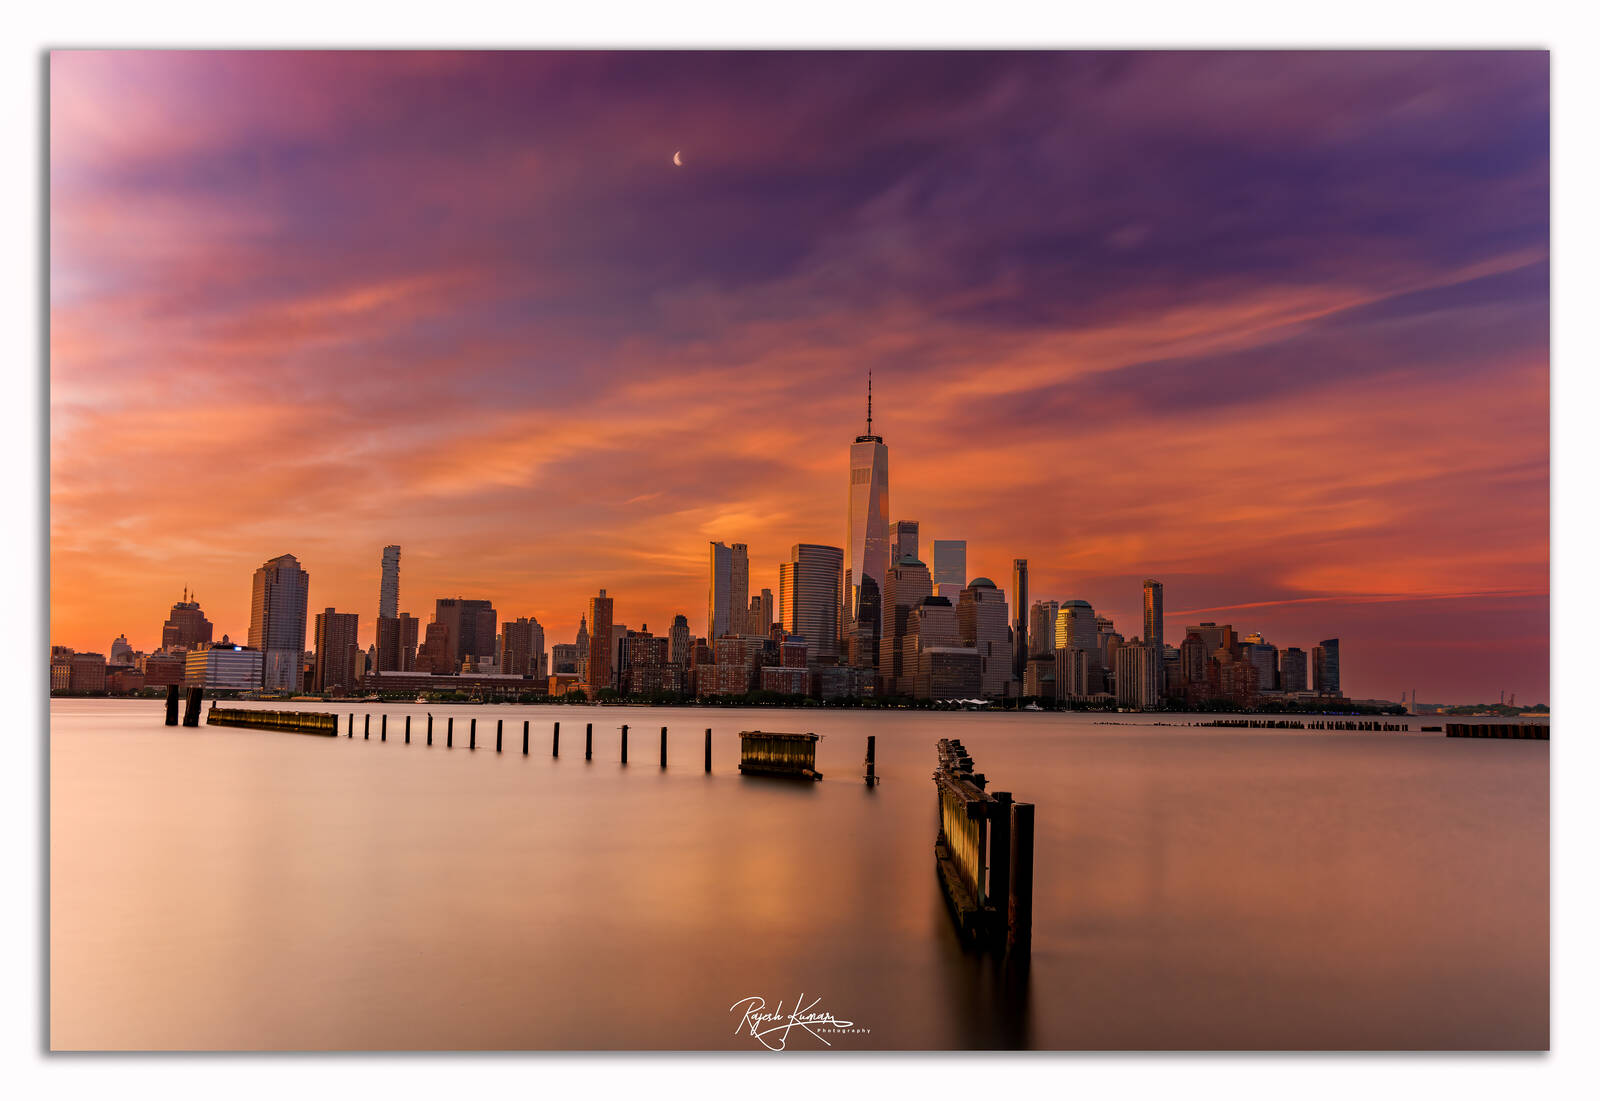 Image of New York from Lefrak Point Lighthouse by Rajesh Kumar